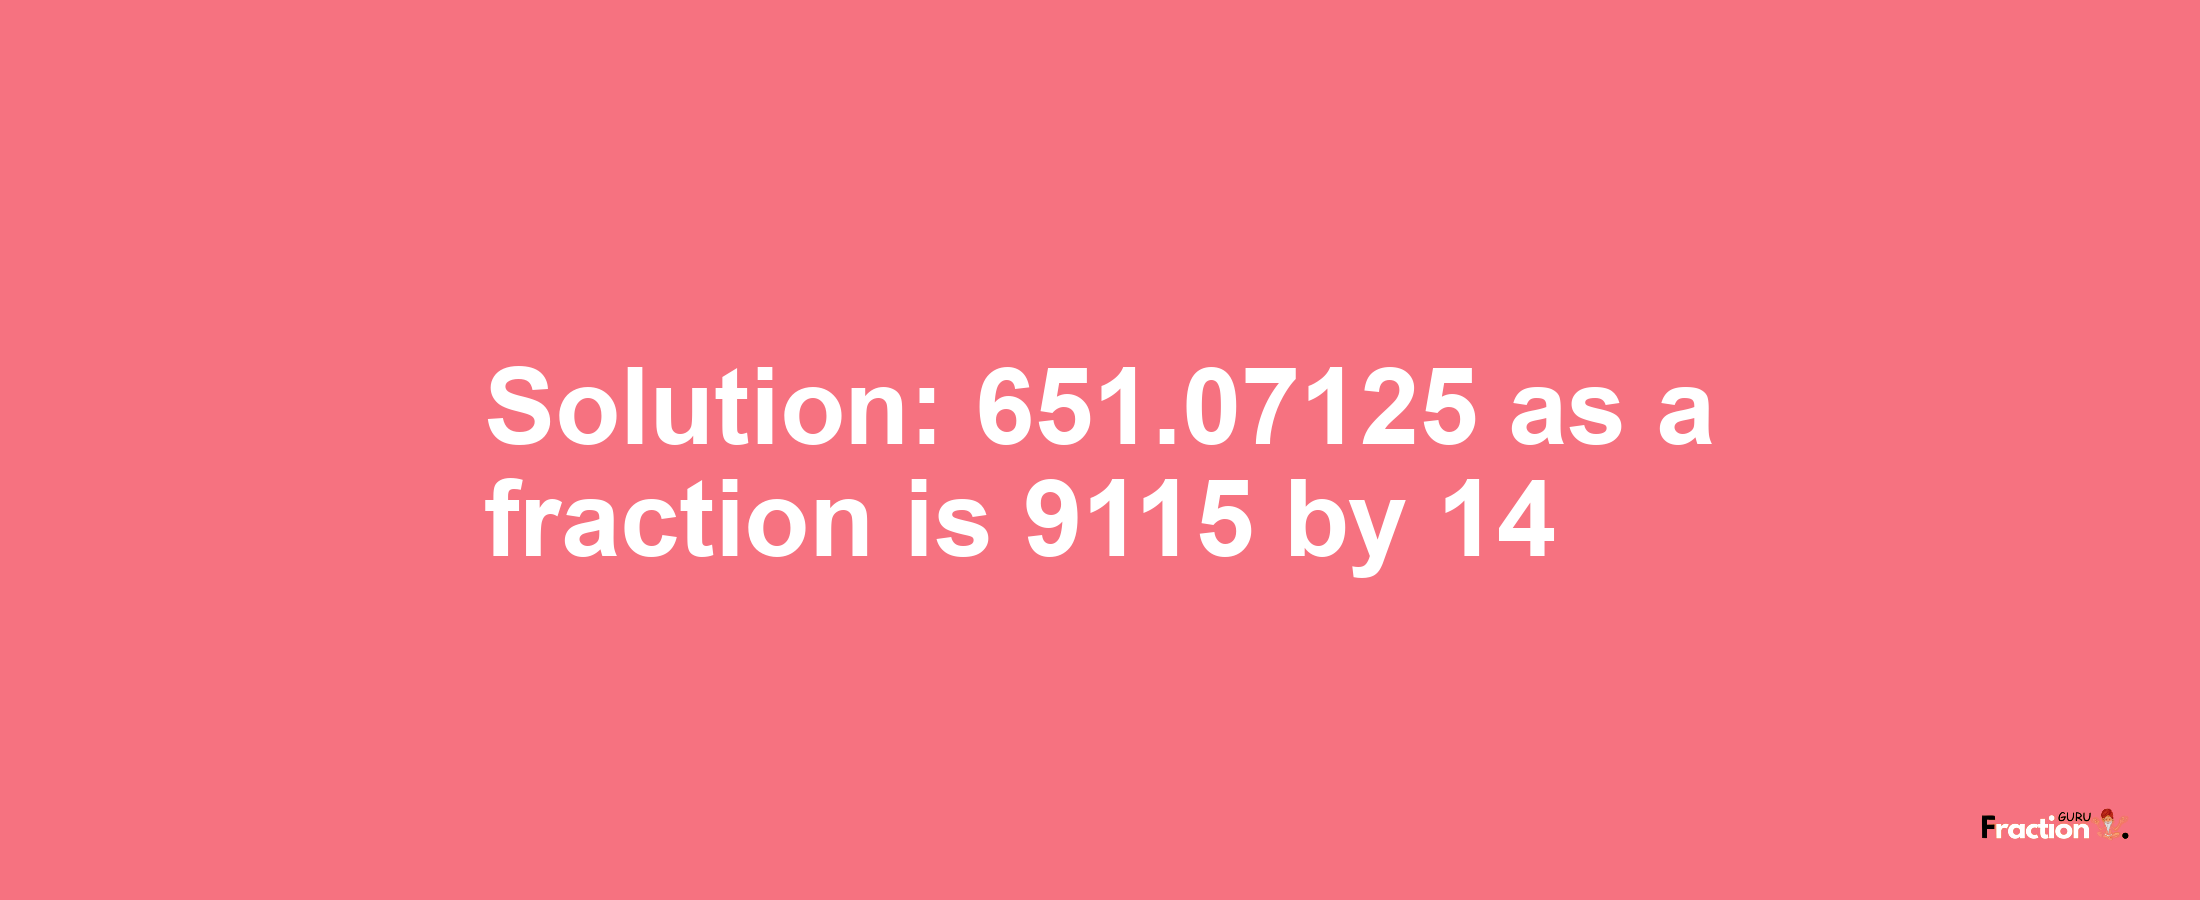 Solution:651.07125 as a fraction is 9115/14